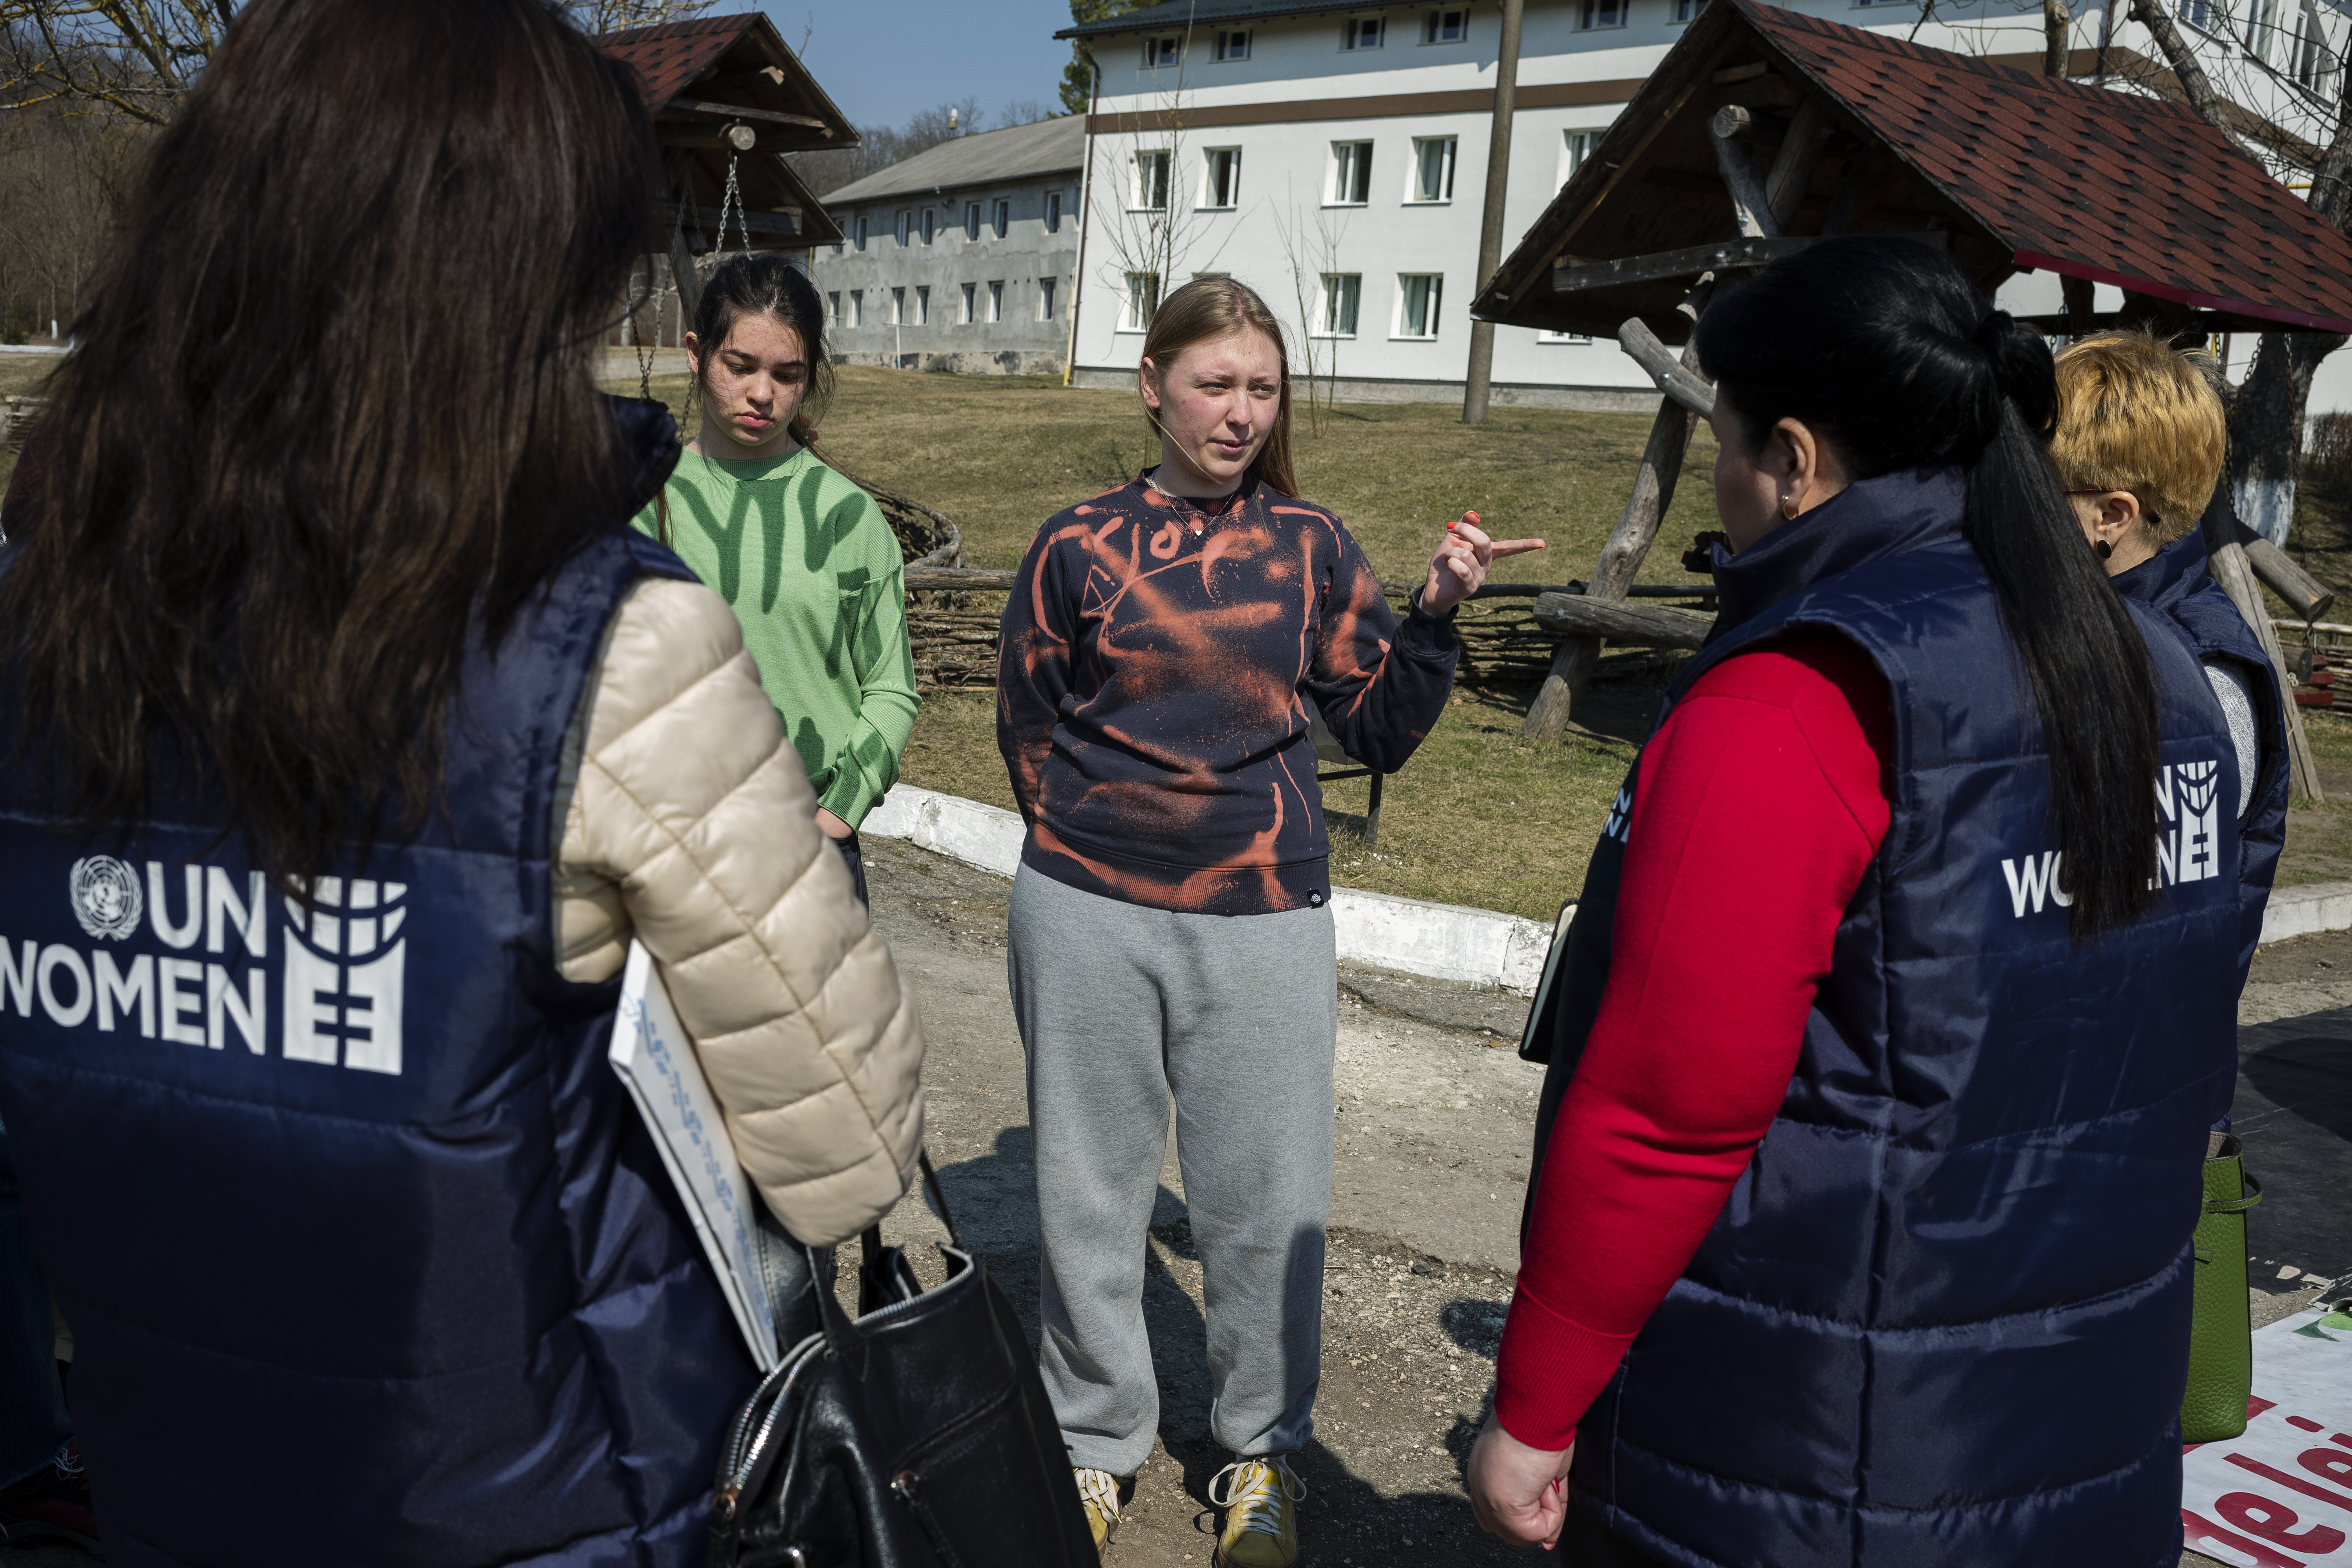 23-year-old Anna, from Mariupol, discussing with UN Women team at the temporary placement center in Vatici, Orhei district, Moldova. Photo credit: Maxime Fossat / UN Women